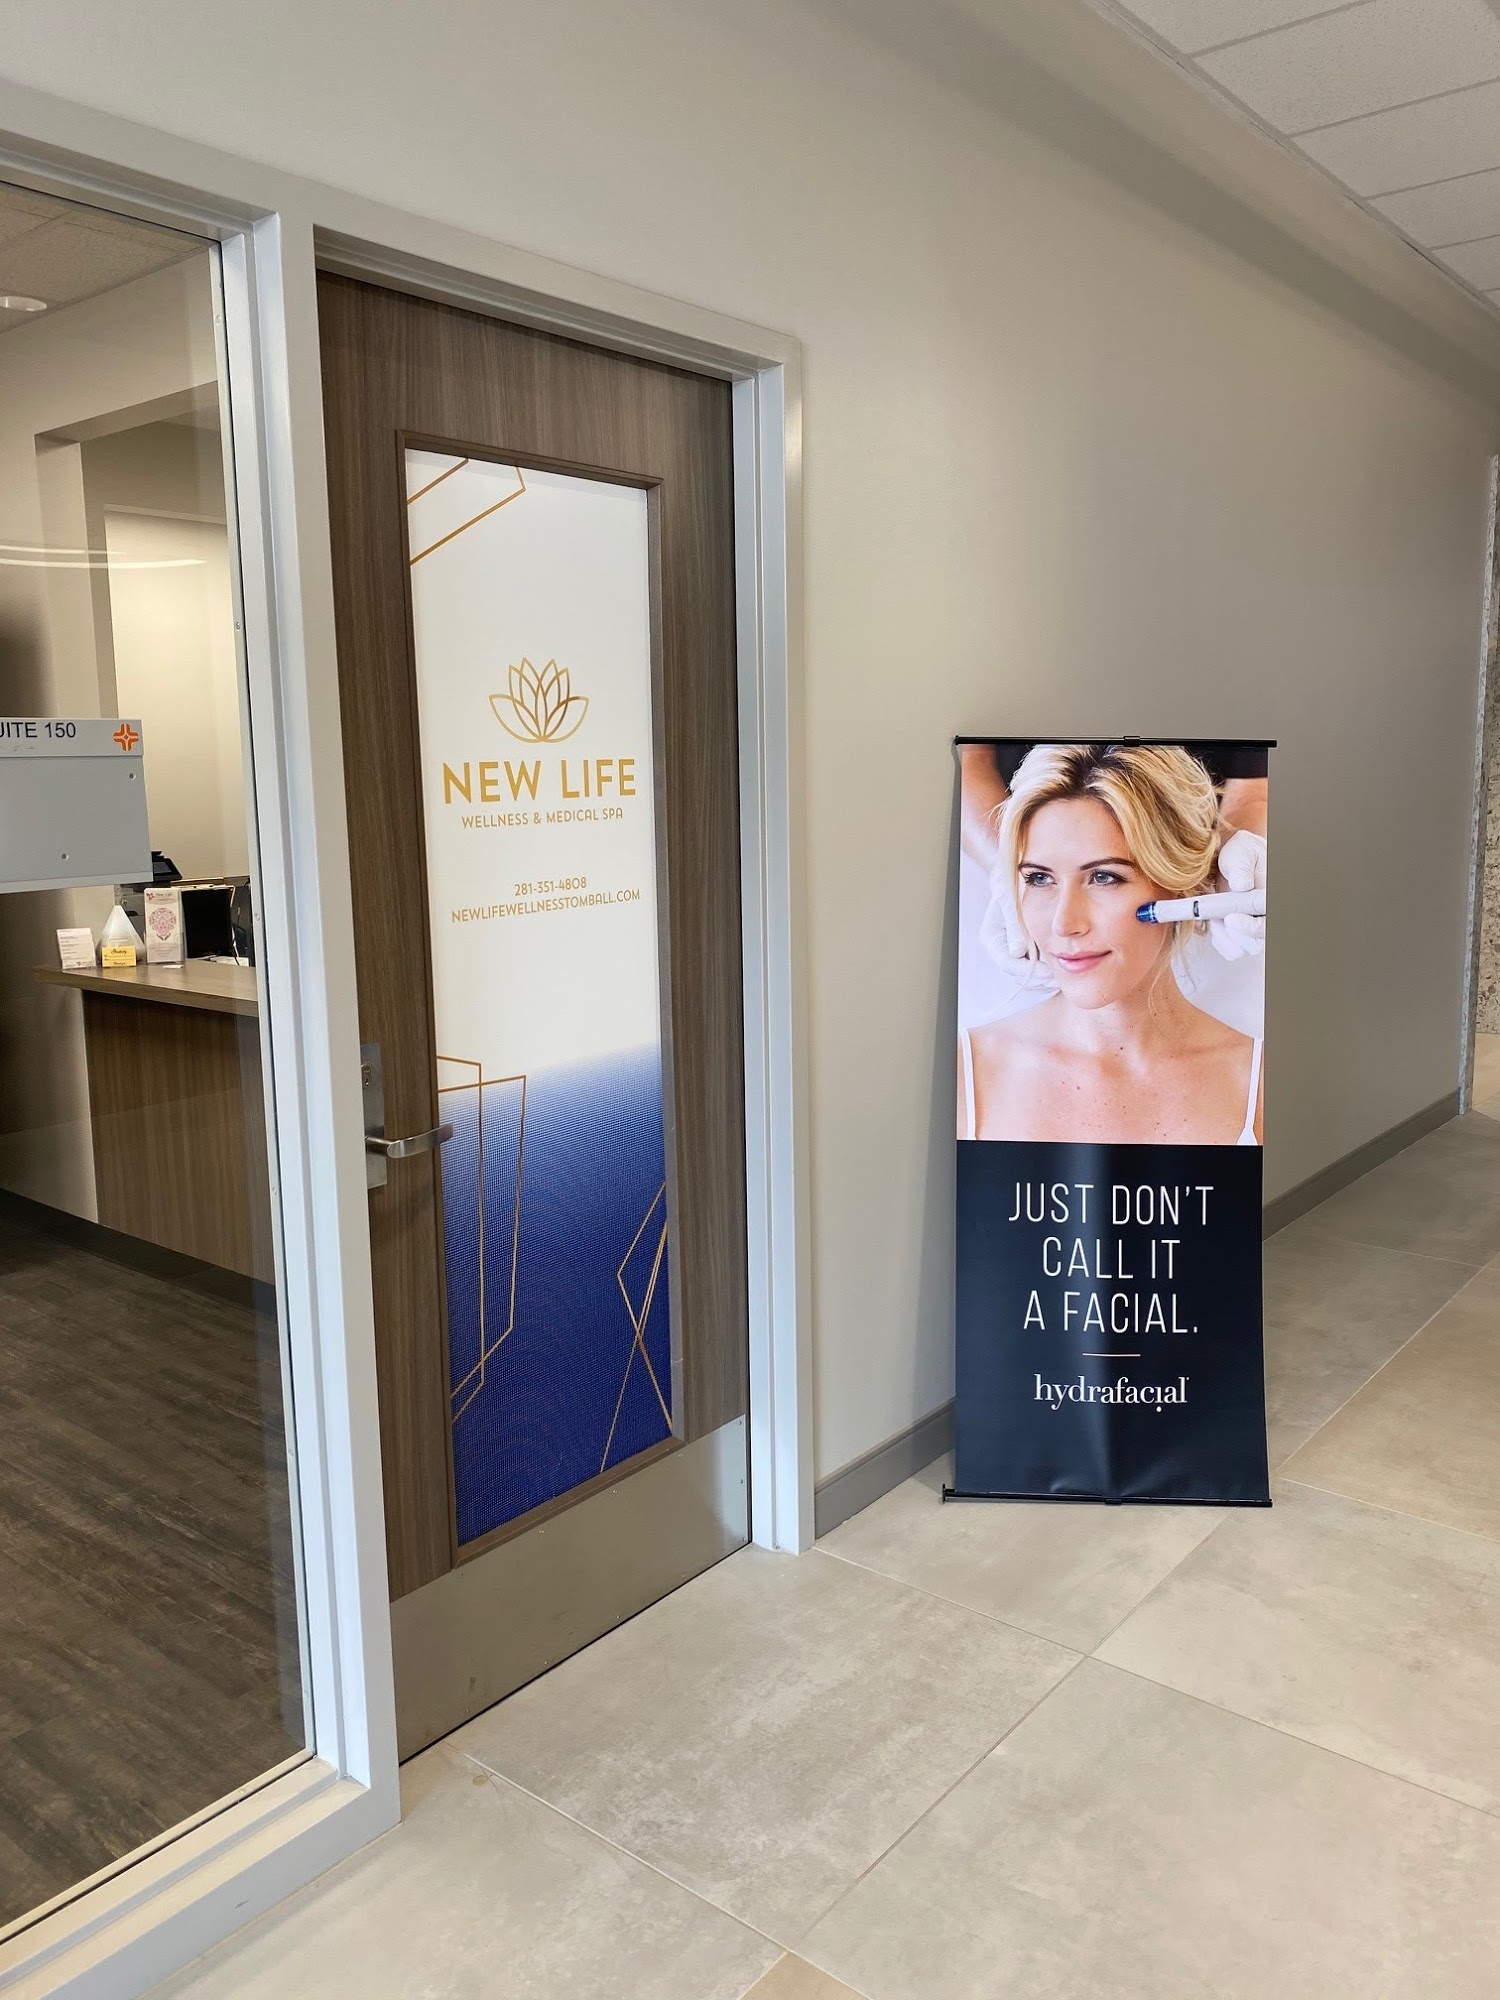 New Life Wellness and Medical Spa